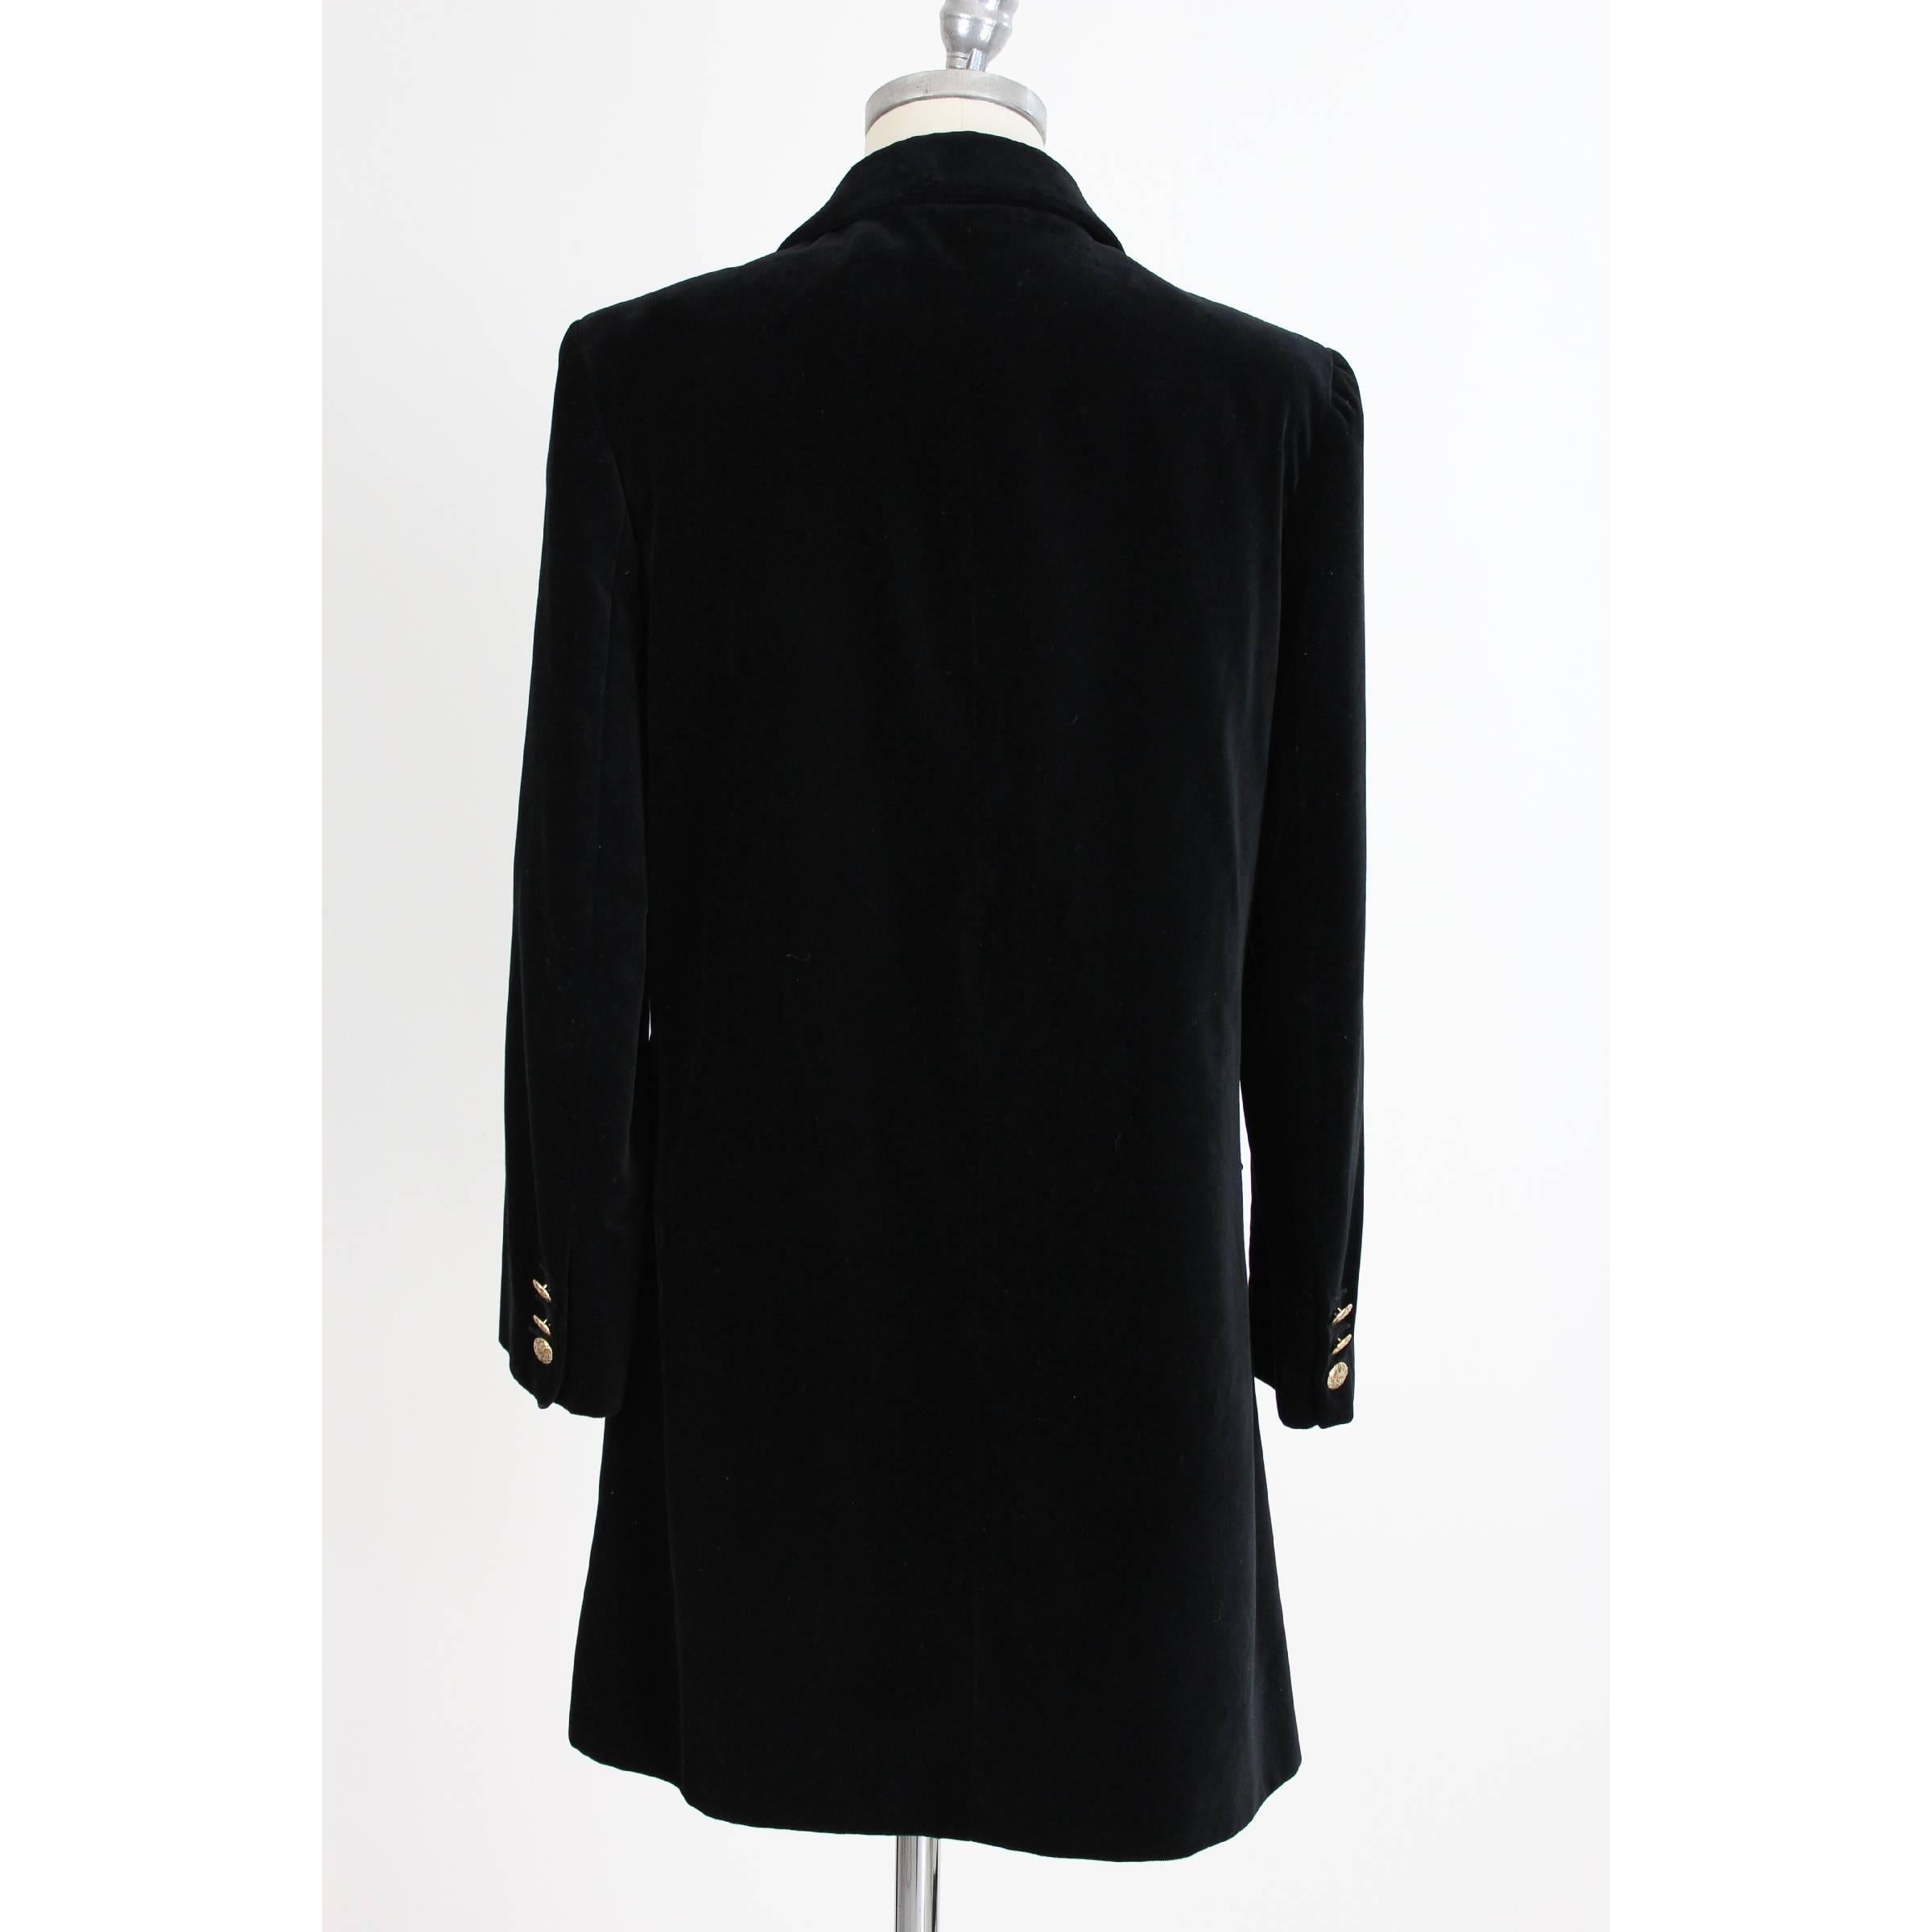 Byblos woman coat poncho type black color. Knee length with logoed gold button closure. Soft velvet fabric. Fully lined inside. Made Italy. Excellent vintage conditions.

Size 42 It 8 Us 10 Uk

Shoulders: 42 cm
Chest / bust: 48 cm
Sleeves: 59